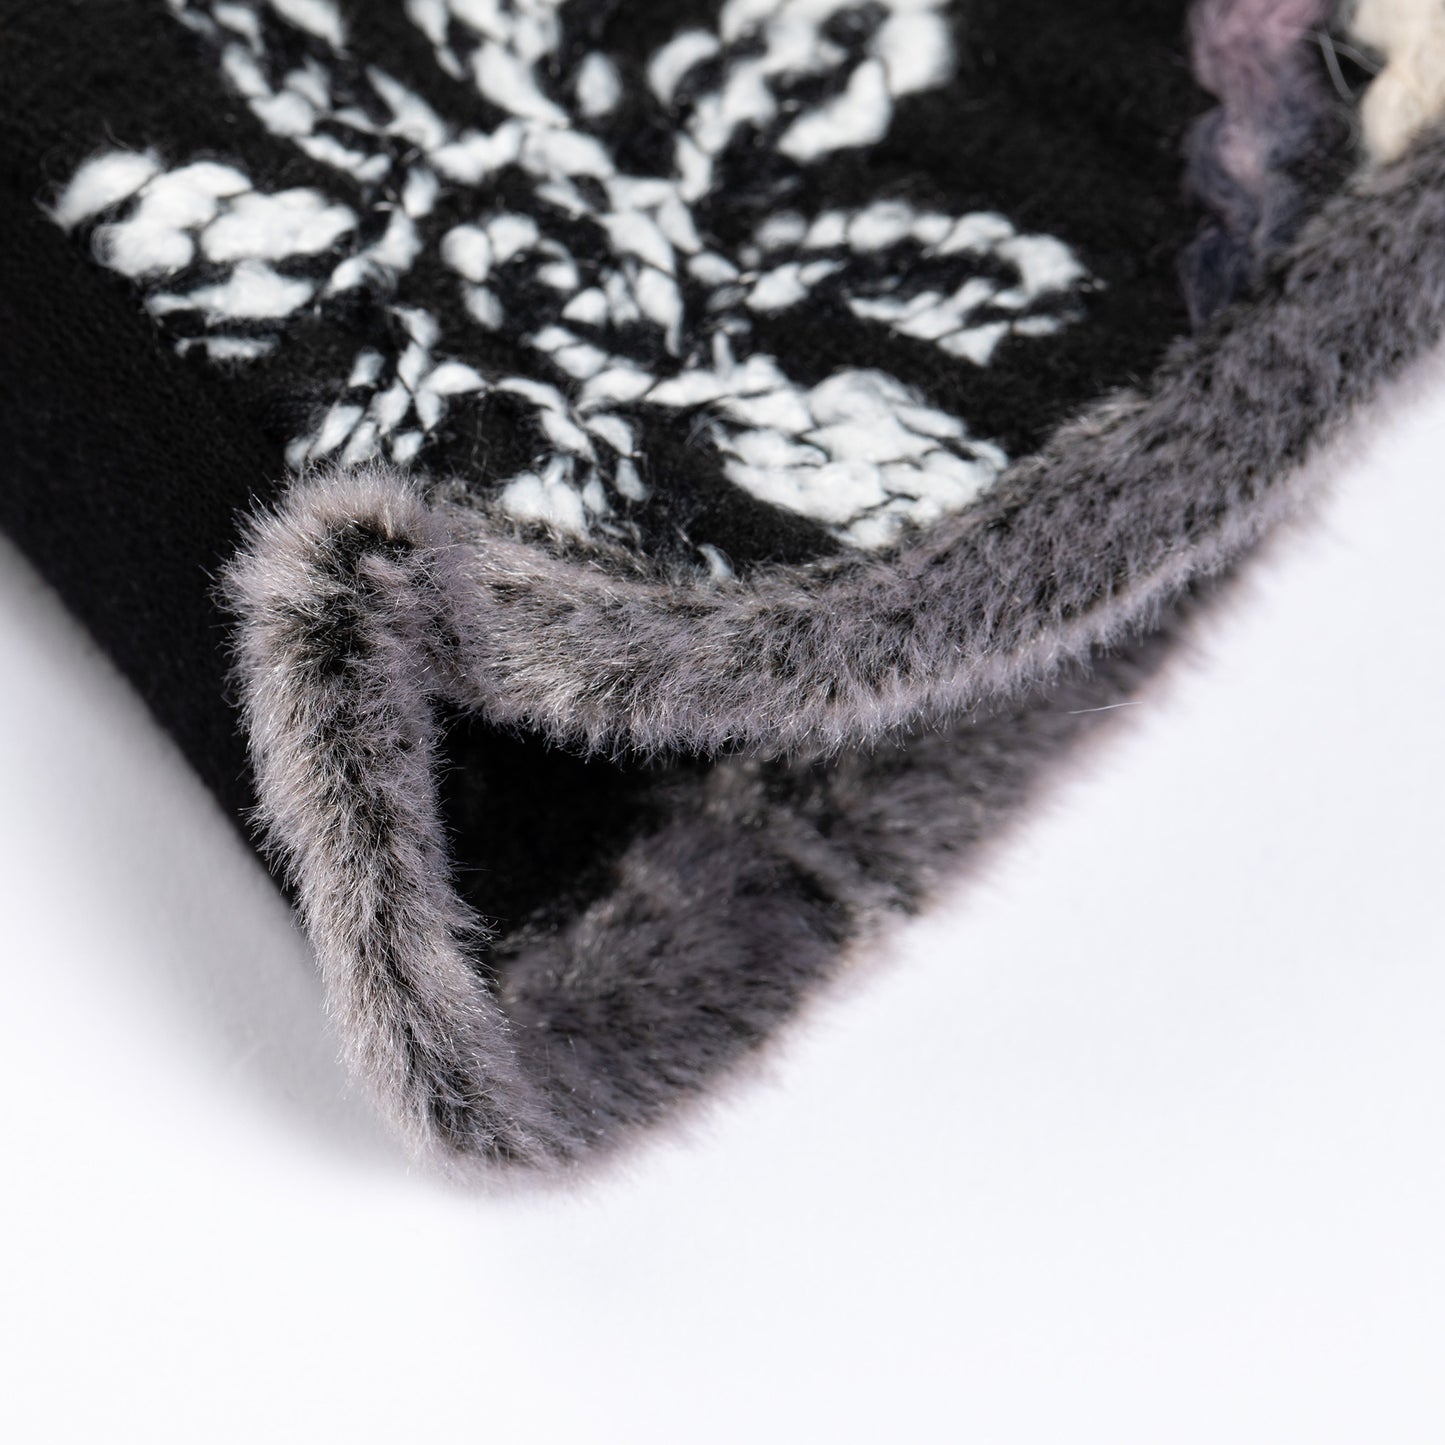 Faux Fur Embroidered Fingerless Gloves